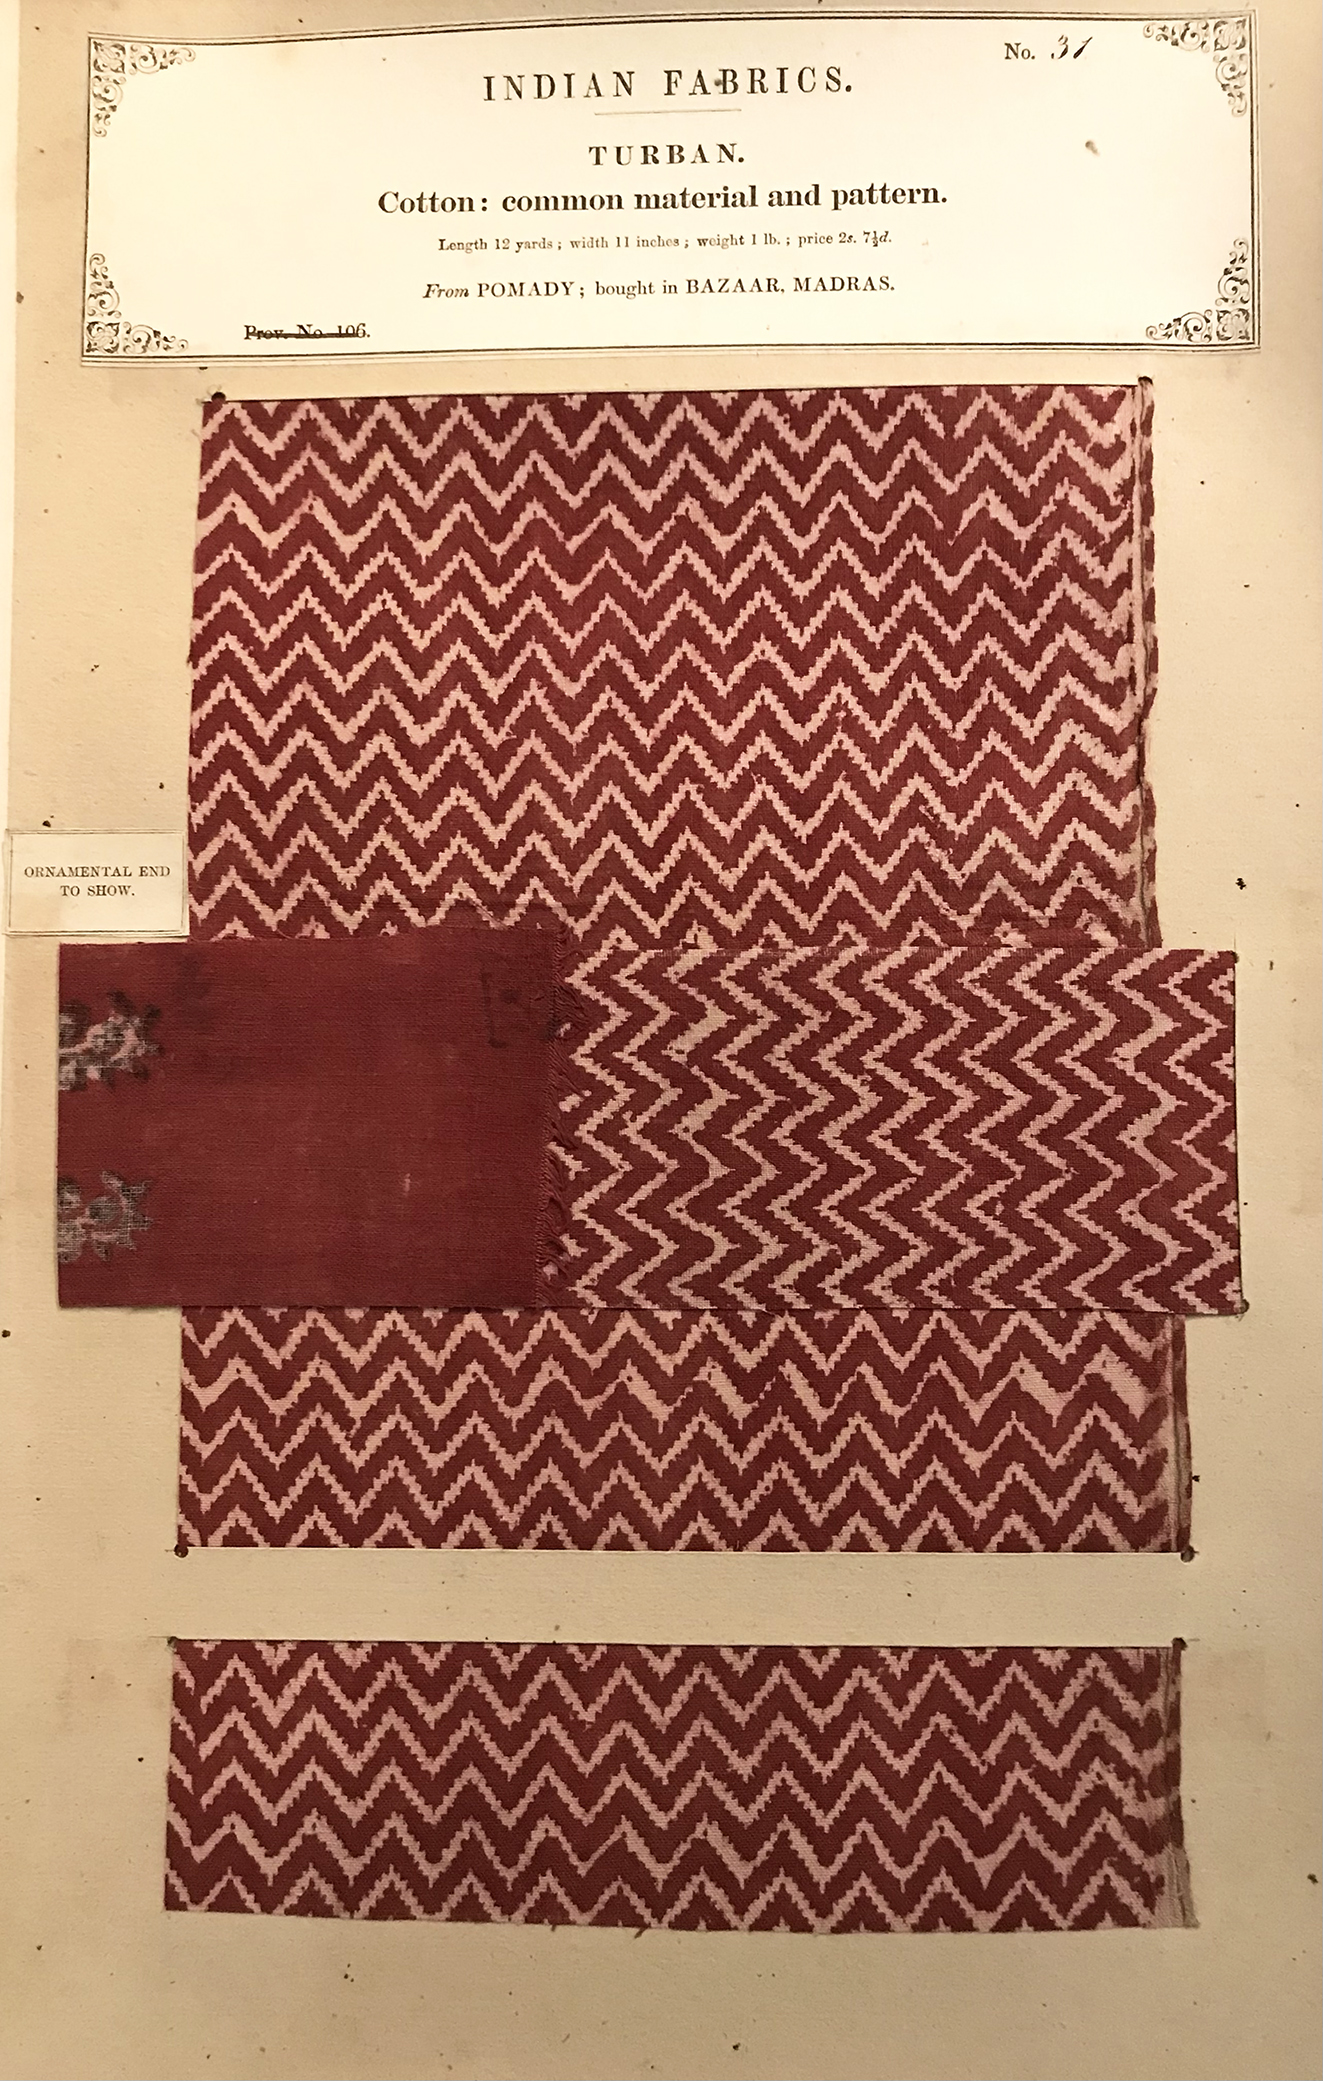 A page of a book showcasing a piece of patterned red cloth.